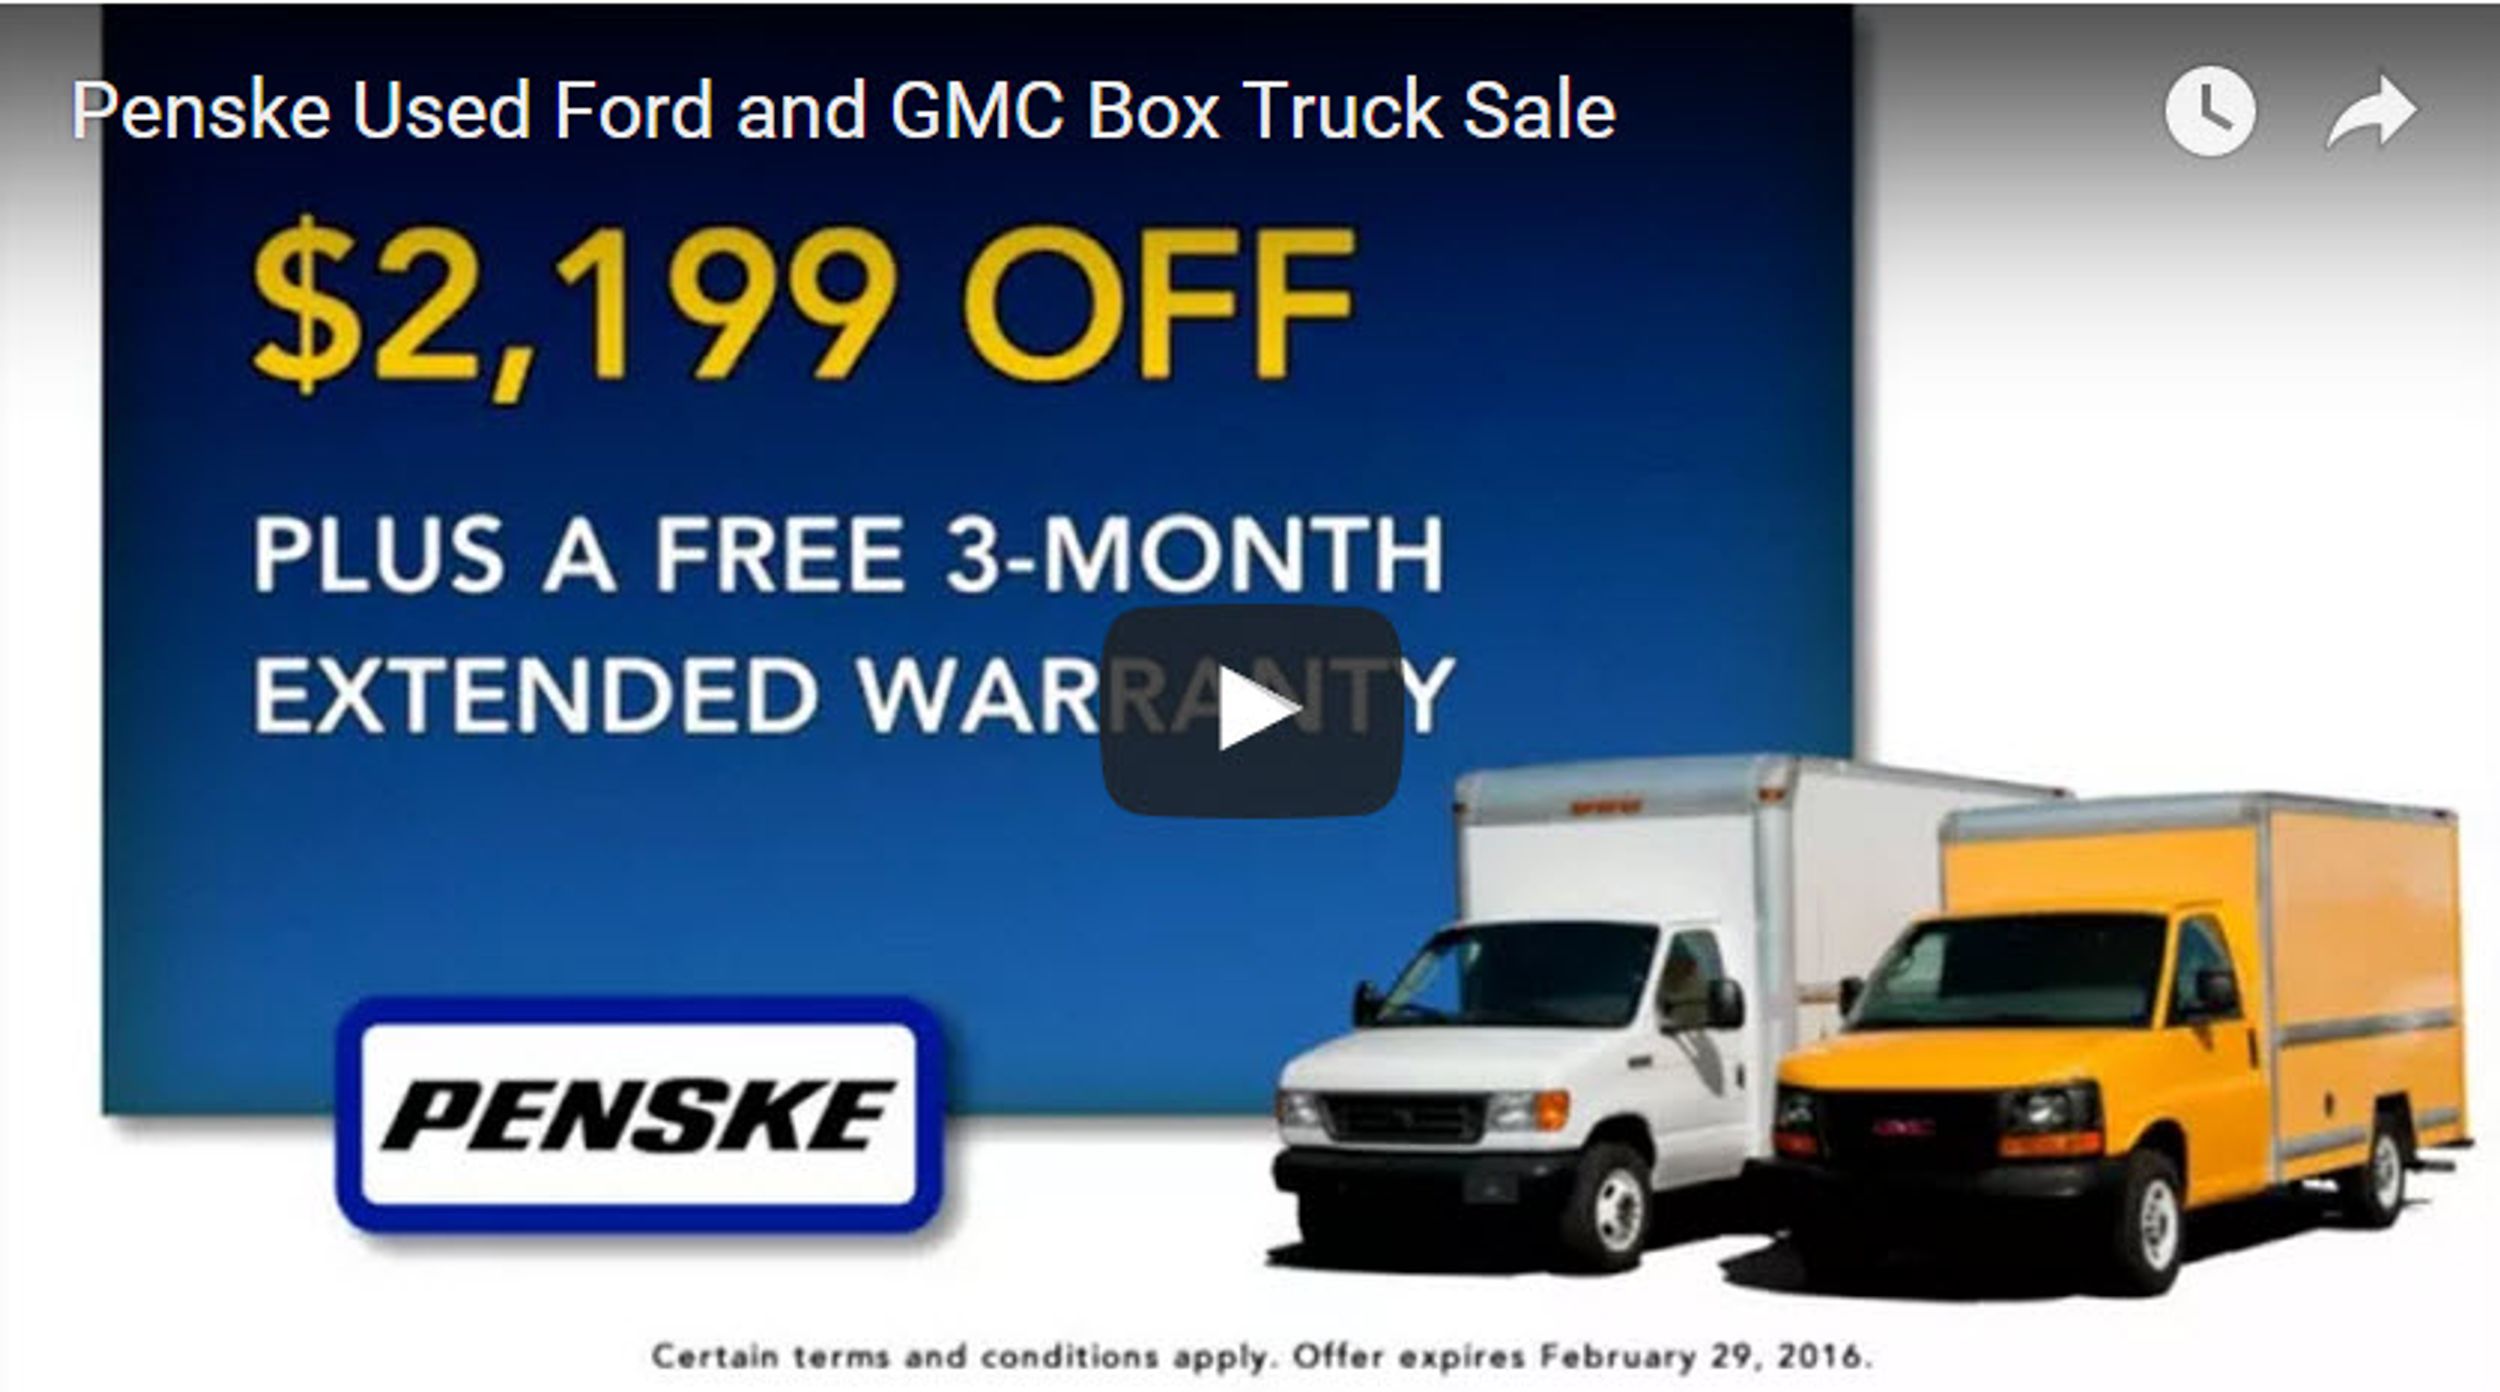 Penske Used Ford and GMC Box Truck Sale